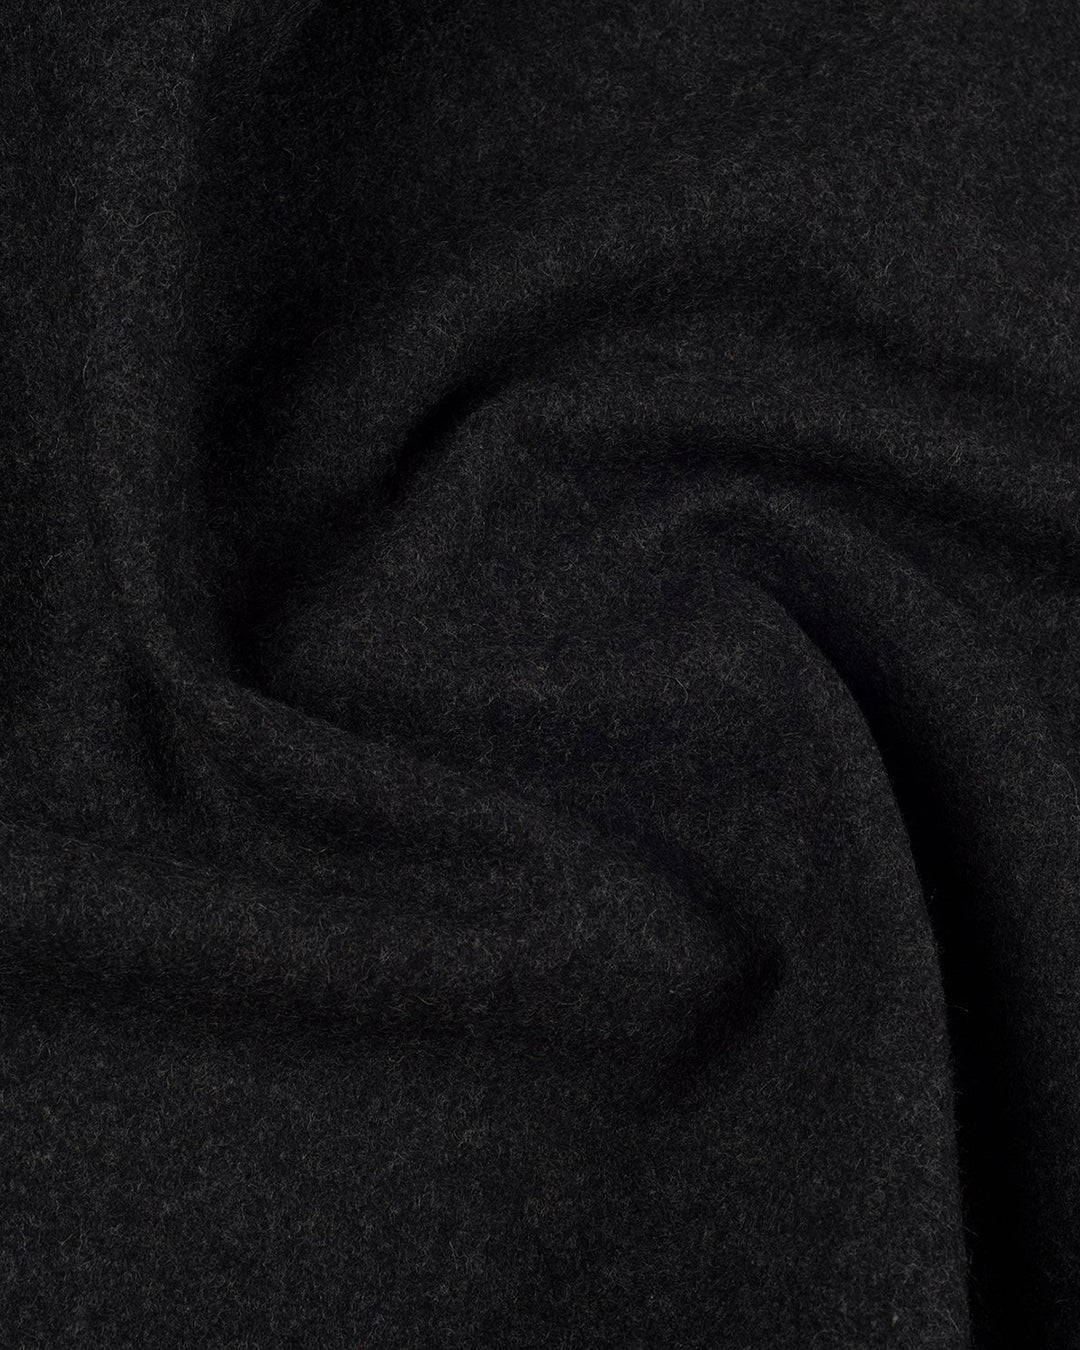 Fabric close up view of the Gurkha Pant in Charcoal Grey Wool